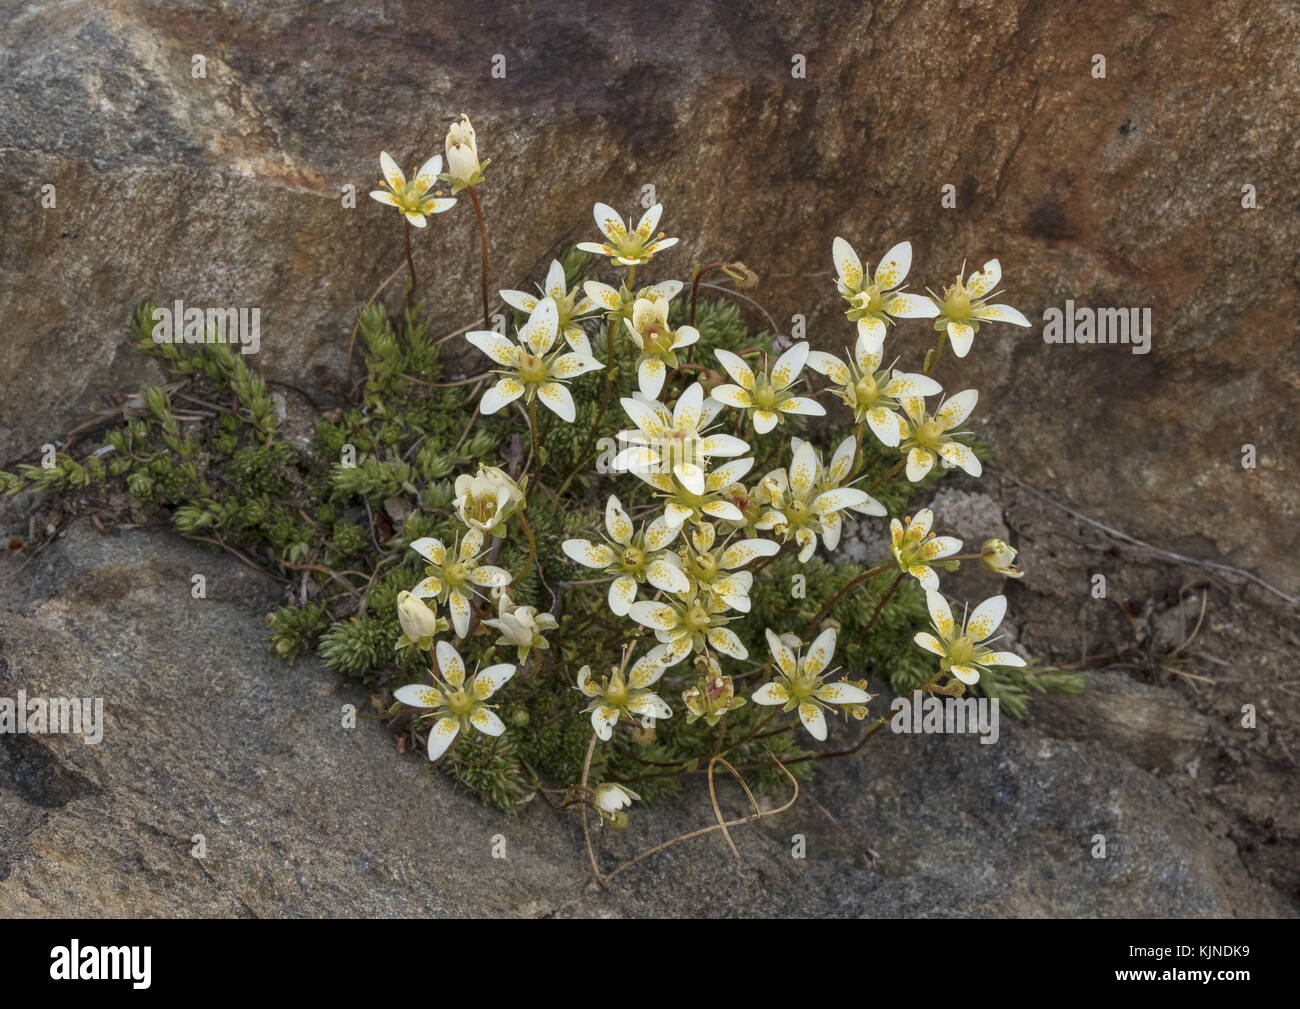 Mossy Saxifrage, Saxifraga bryoides, in flower in rock crevice, Swiss Alps. Stock Photo